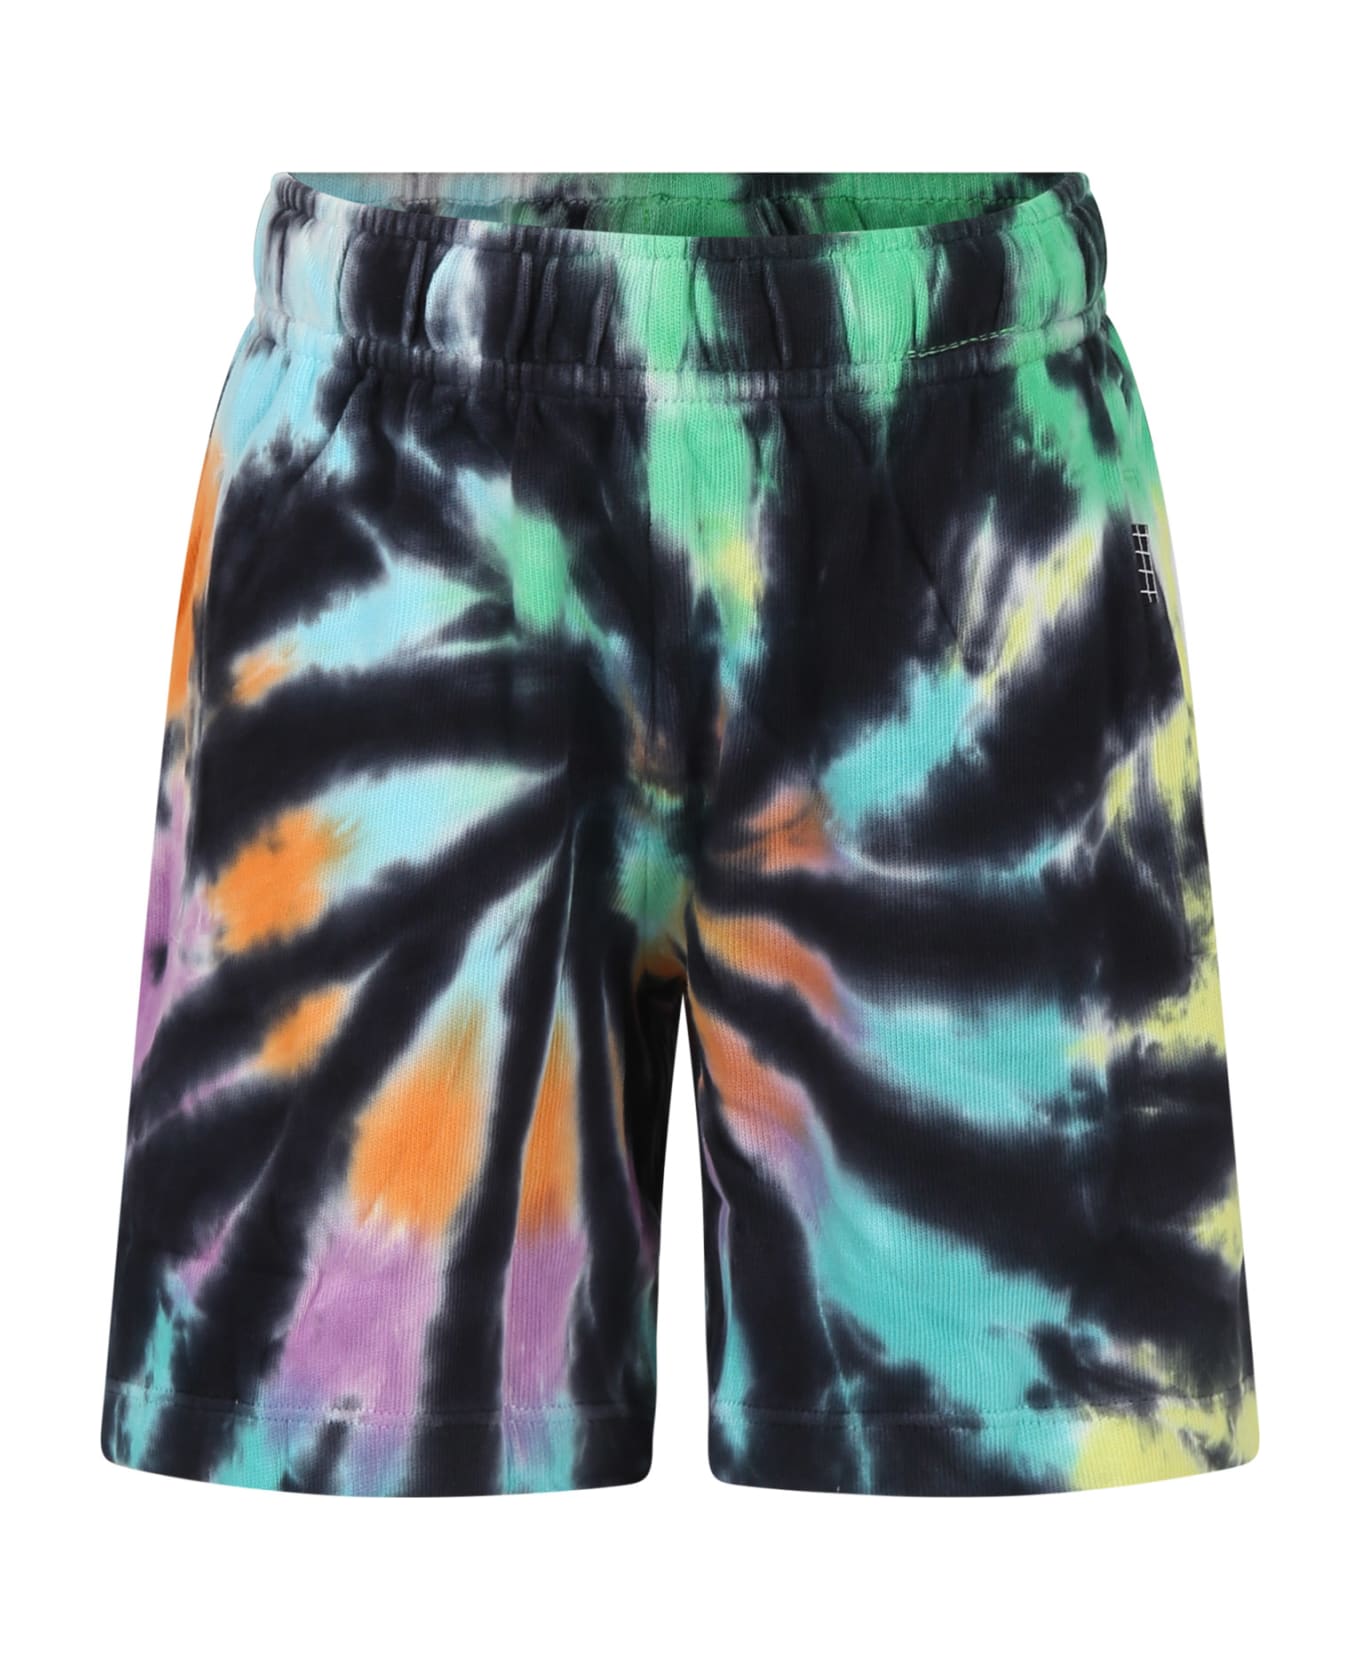 Molo Black Shorts For Boy With Tie-dye Print - Multicolor ボトムス